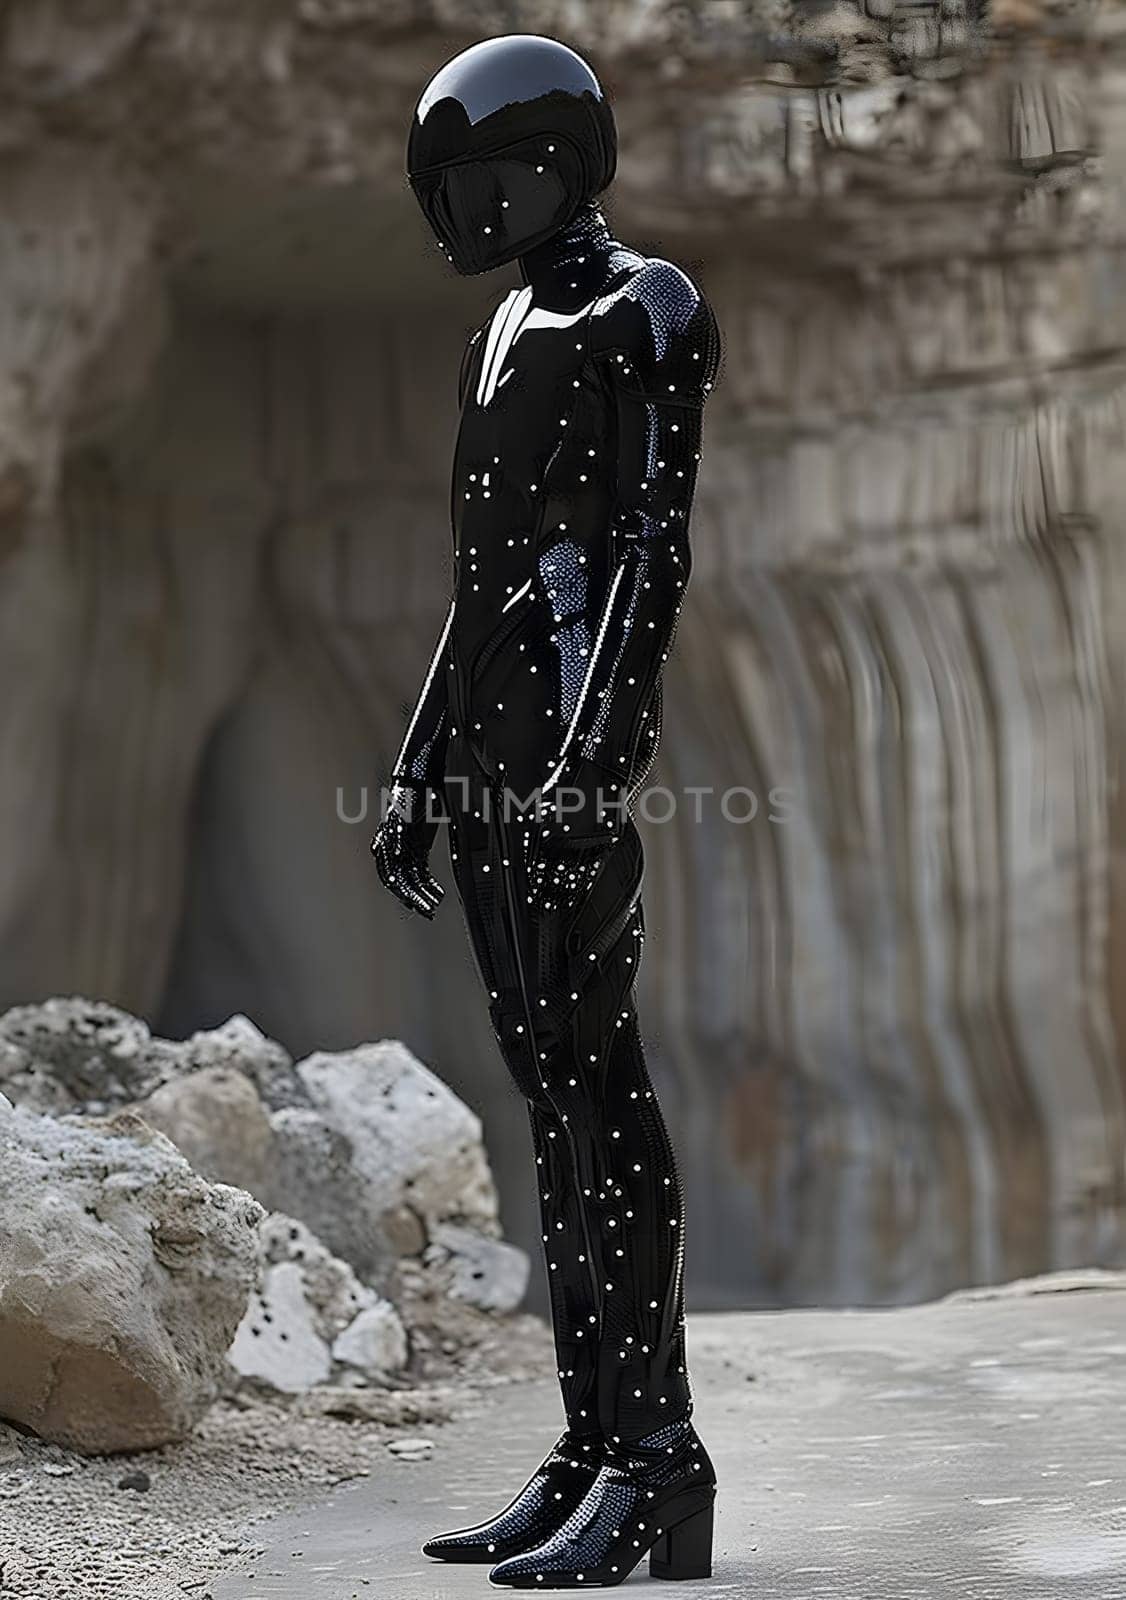 A man in black latex suit and helmet is displayed as a sculpture in front of a rock wall. The event showcases a unique mix of art and history